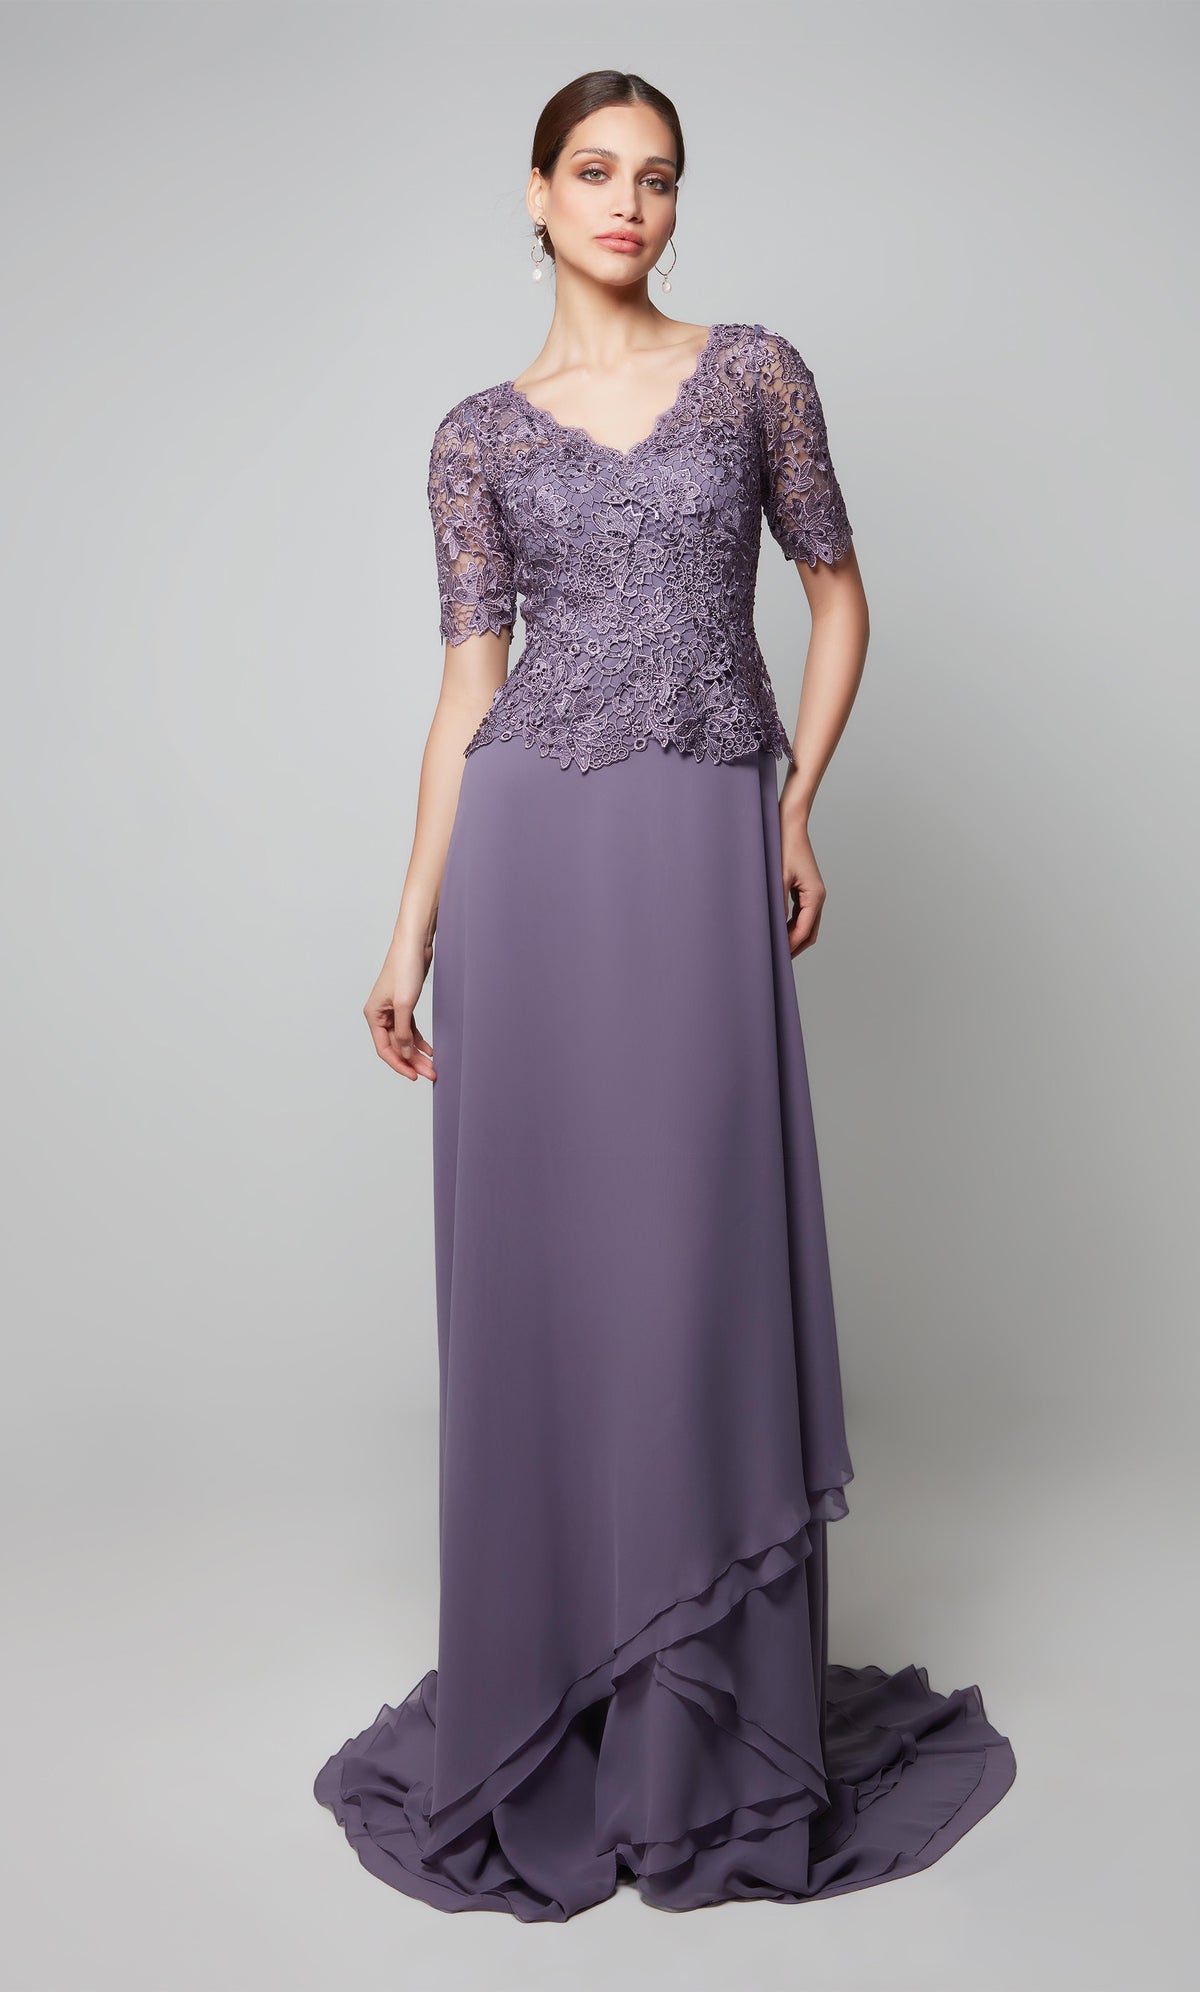 Purple special occasion dress with a lace peplum top with short sleeves and a flowy chiffon skirt.